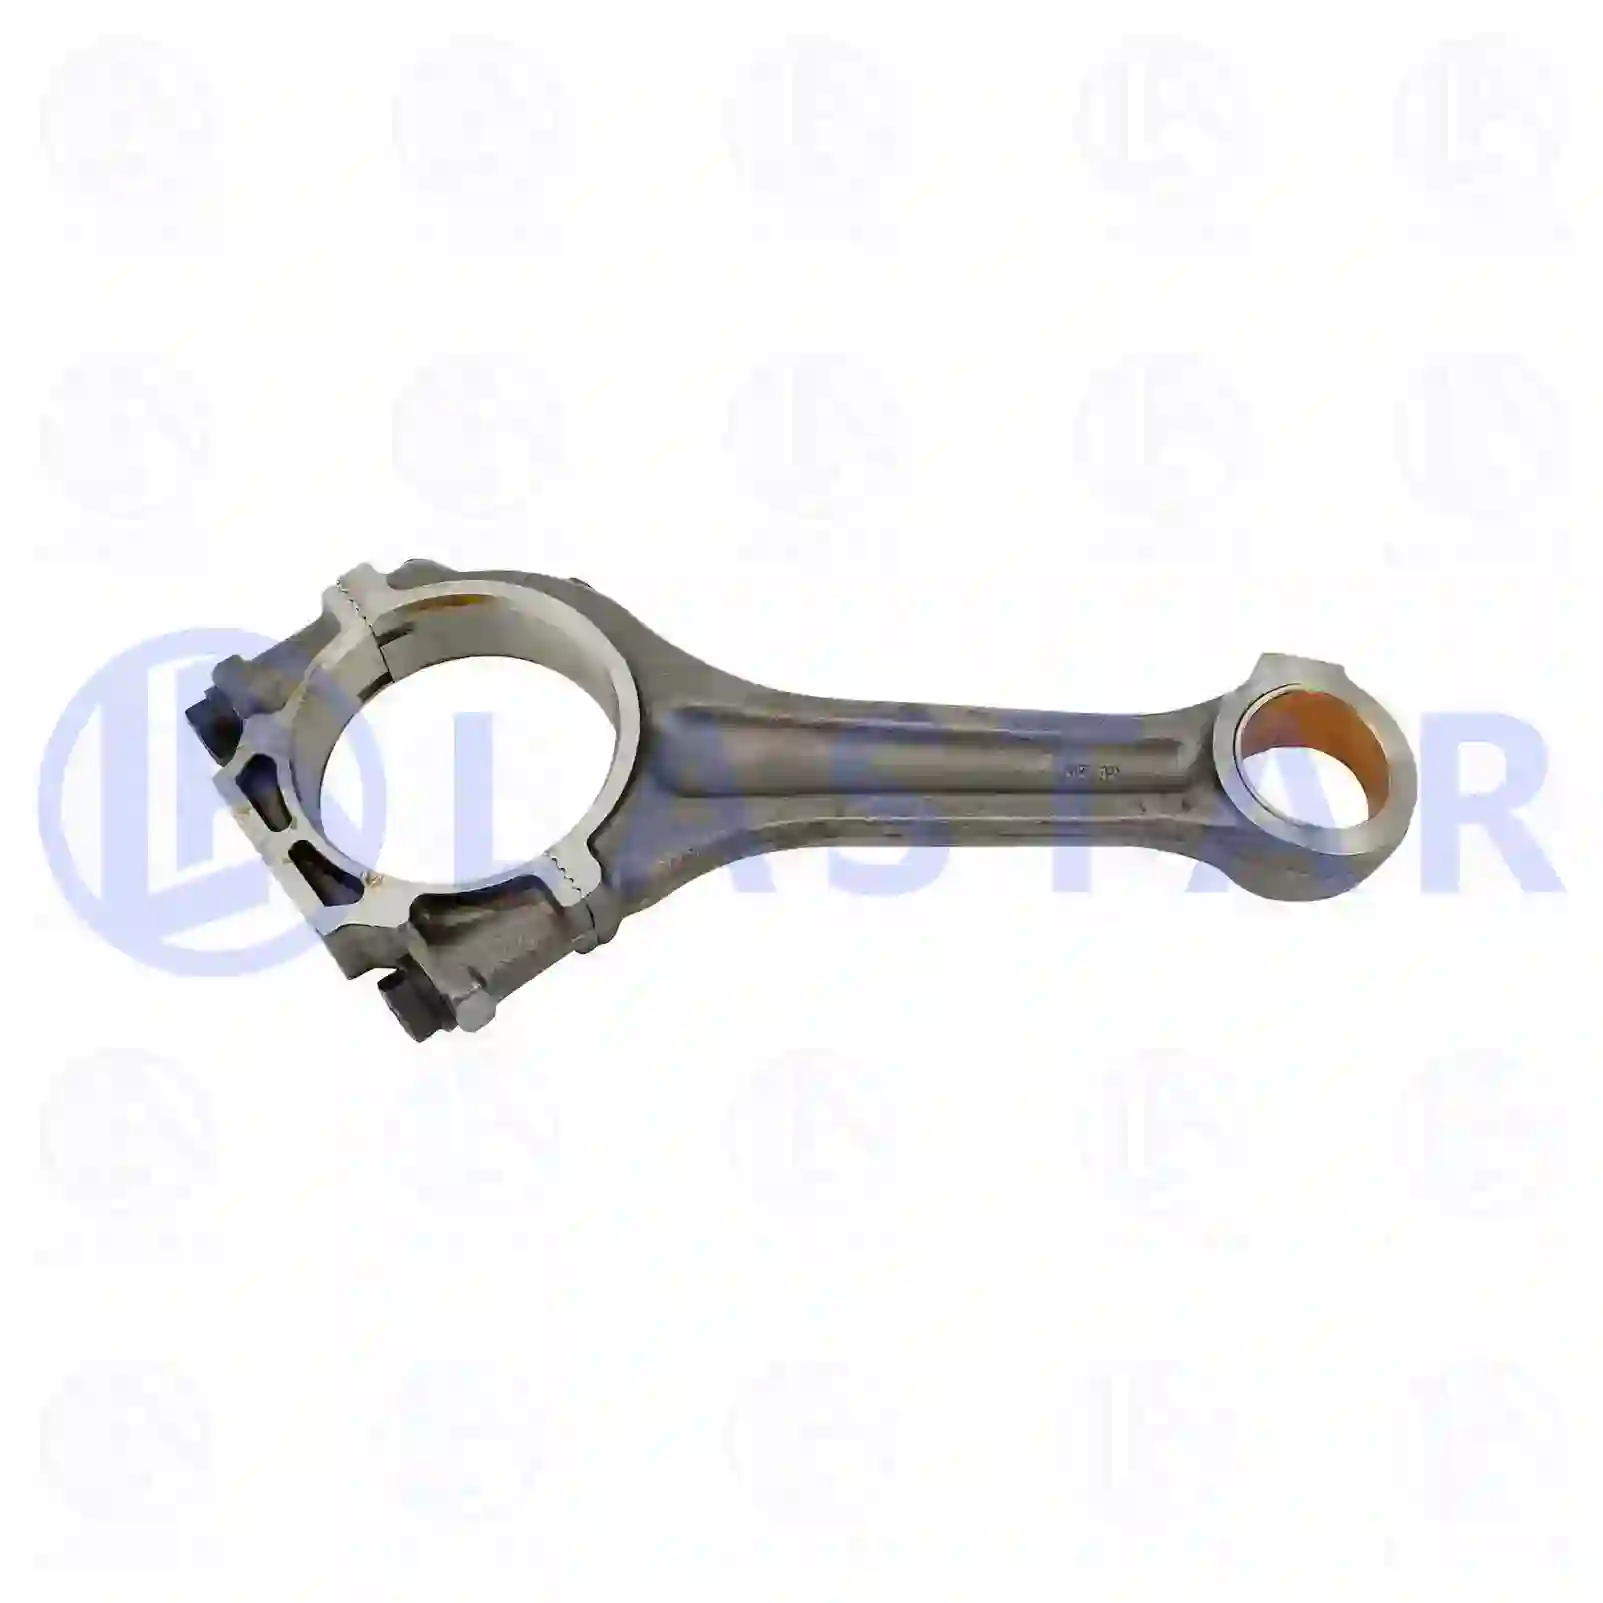 Connecting rod, conical head, 77701880, 4420300020, 4420300220, 442030022080 ||  77701880 Lastar Spare Part | Truck Spare Parts, Auotomotive Spare Parts Connecting rod, conical head, 77701880, 4420300020, 4420300220, 442030022080 ||  77701880 Lastar Spare Part | Truck Spare Parts, Auotomotive Spare Parts